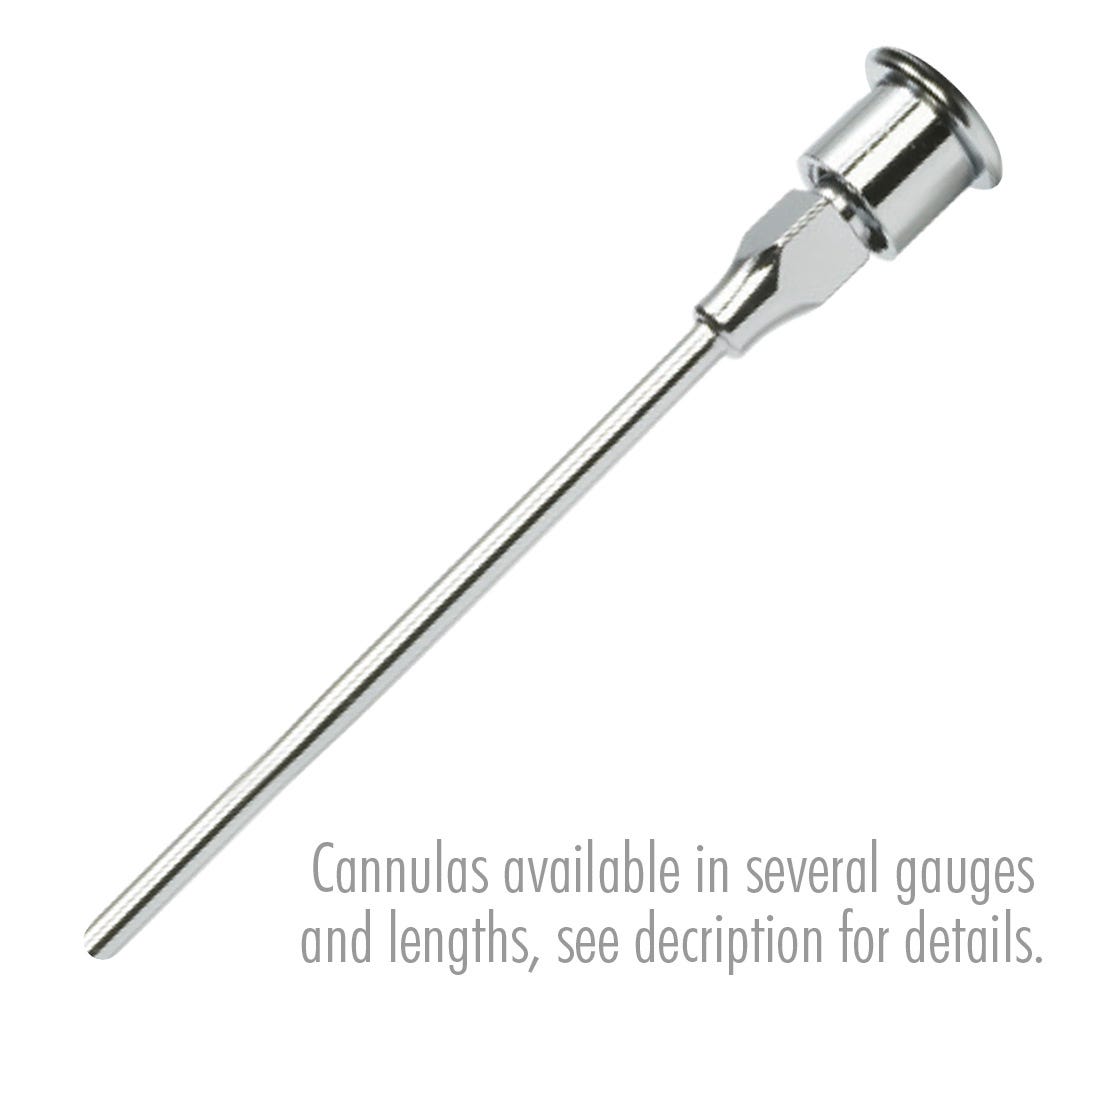 ACE Irrigation Cannula- Stainless Steel 18g x 2-1/2", straight